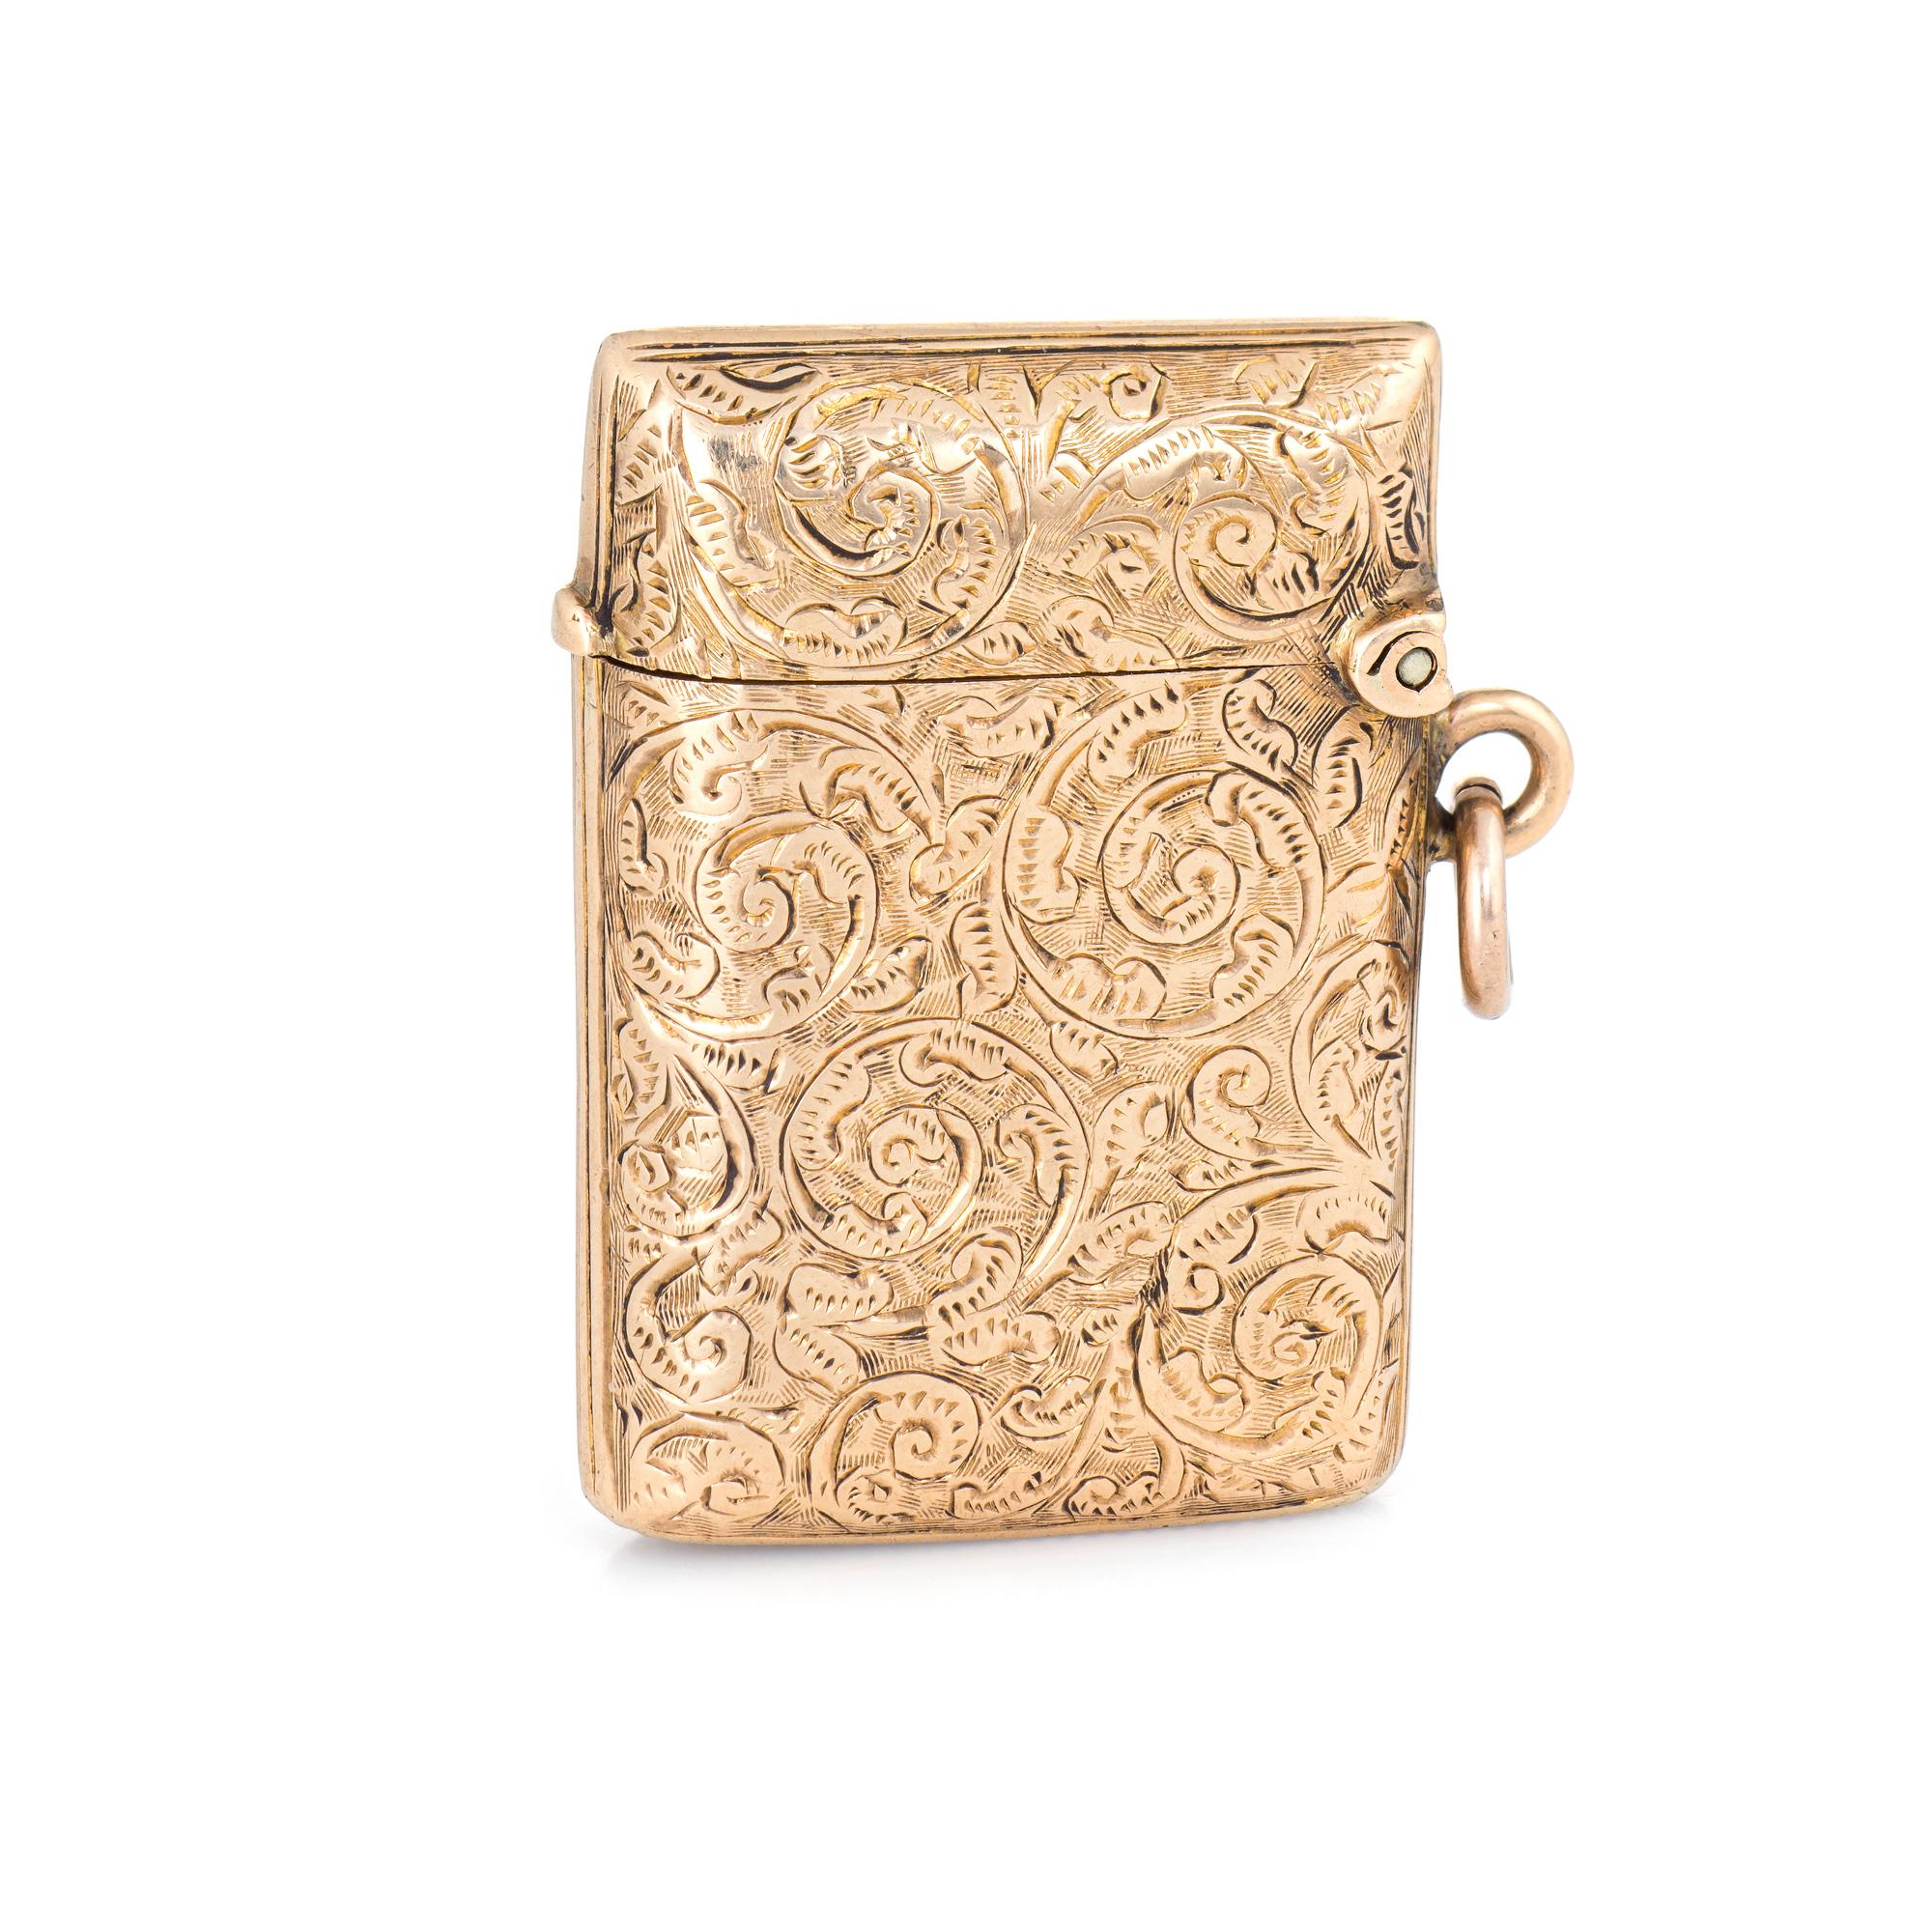 Finely detailed antique Victorian (circa 1880s to 1900s) pill box crafted in 9 karat rose gold. 

The pill box features a side positioned bale that allows for wear as a pendant. The case opens to accommodate a keepsake or photo. The exterior